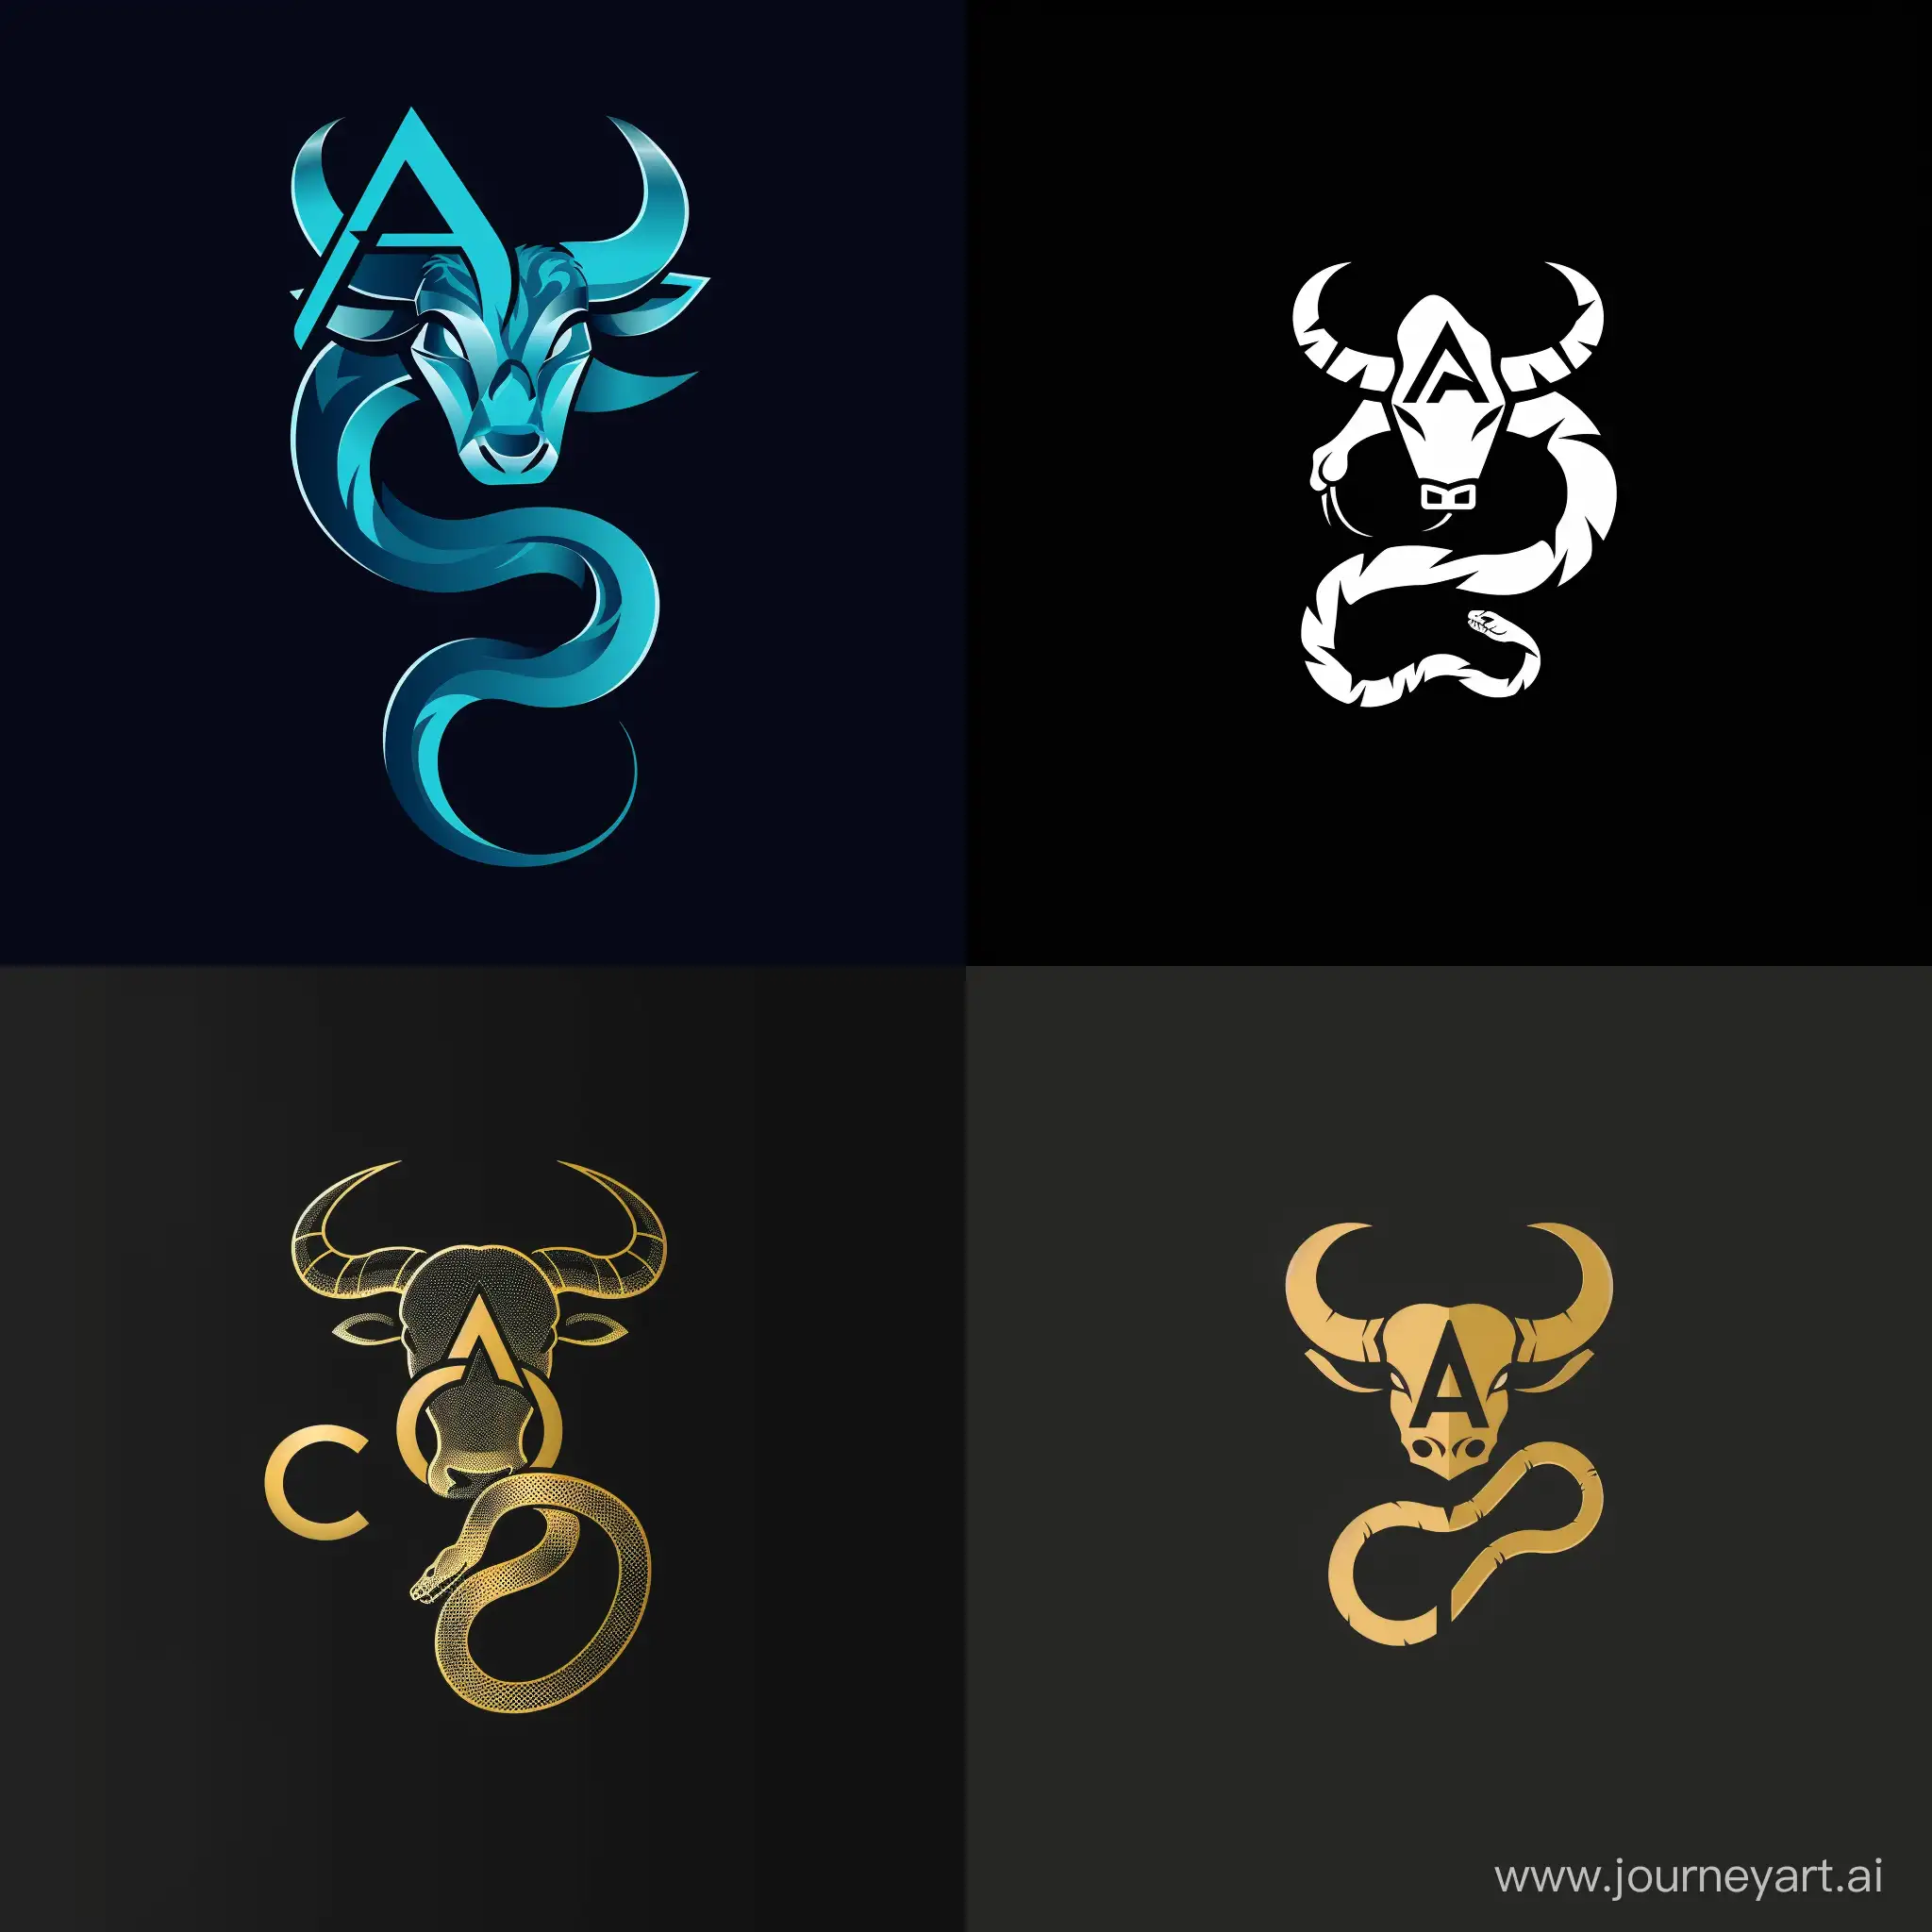 Futuristic-Technology-Logo-AC-Initials-with-Ox-and-Snake-Motif